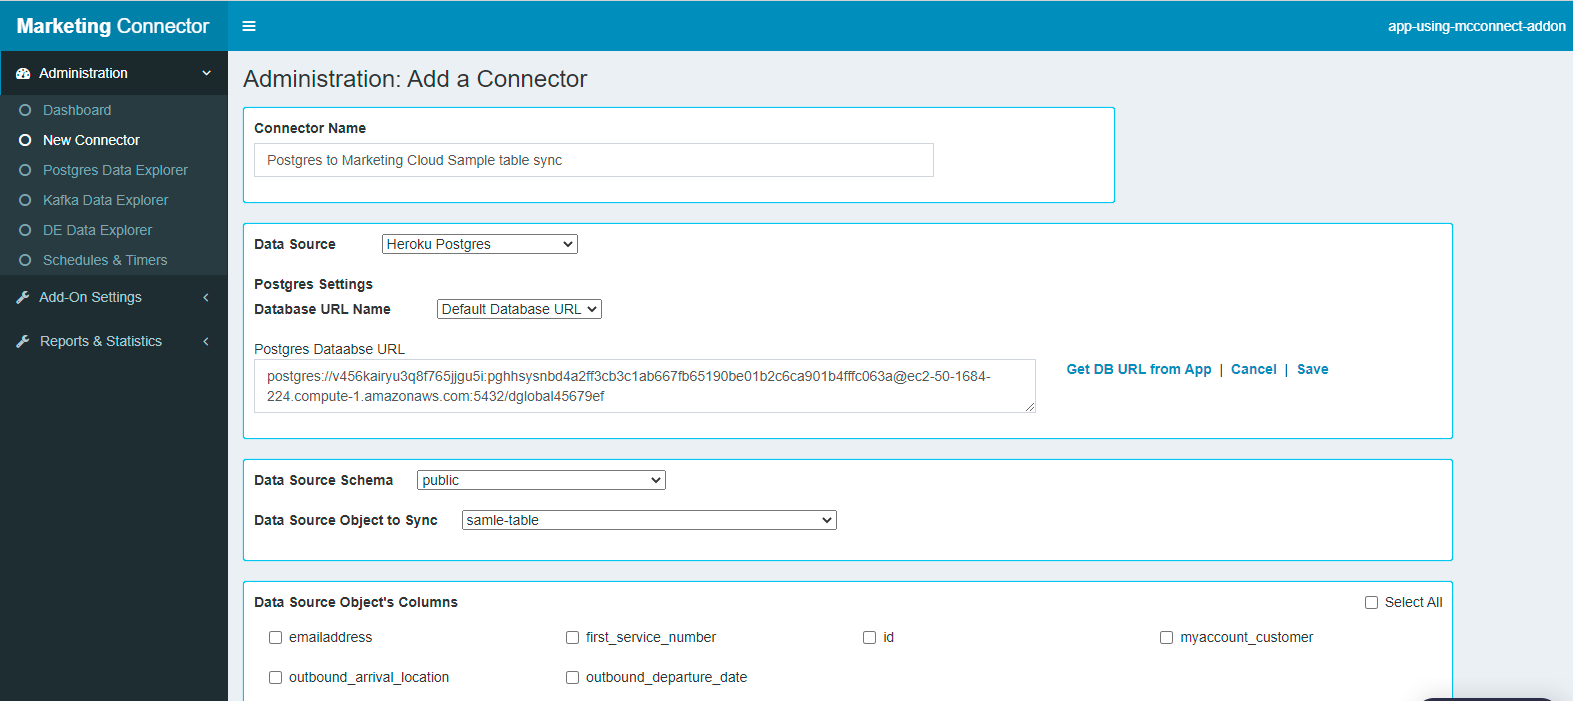 A screenshot of the Add a Connector configuration page and some of its settings.